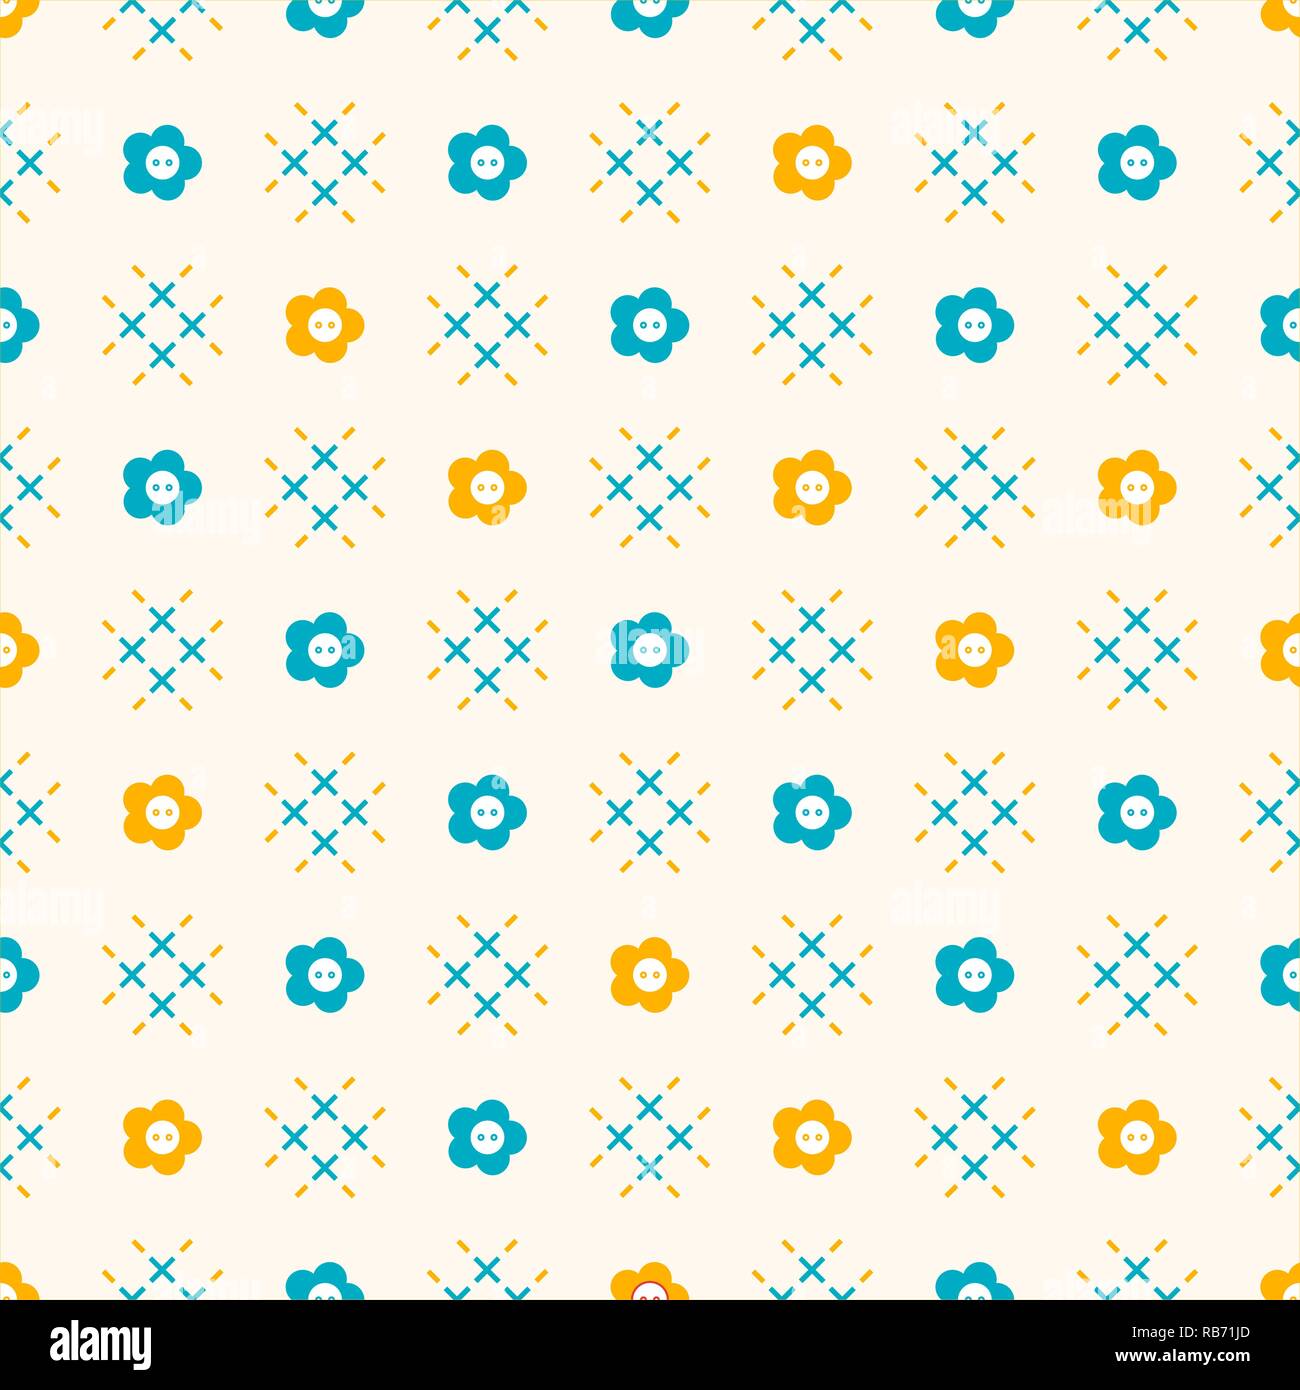 Seamless pattern with buttons. Sewing and needlework background. Template for design, fabric, print. Stock Vector